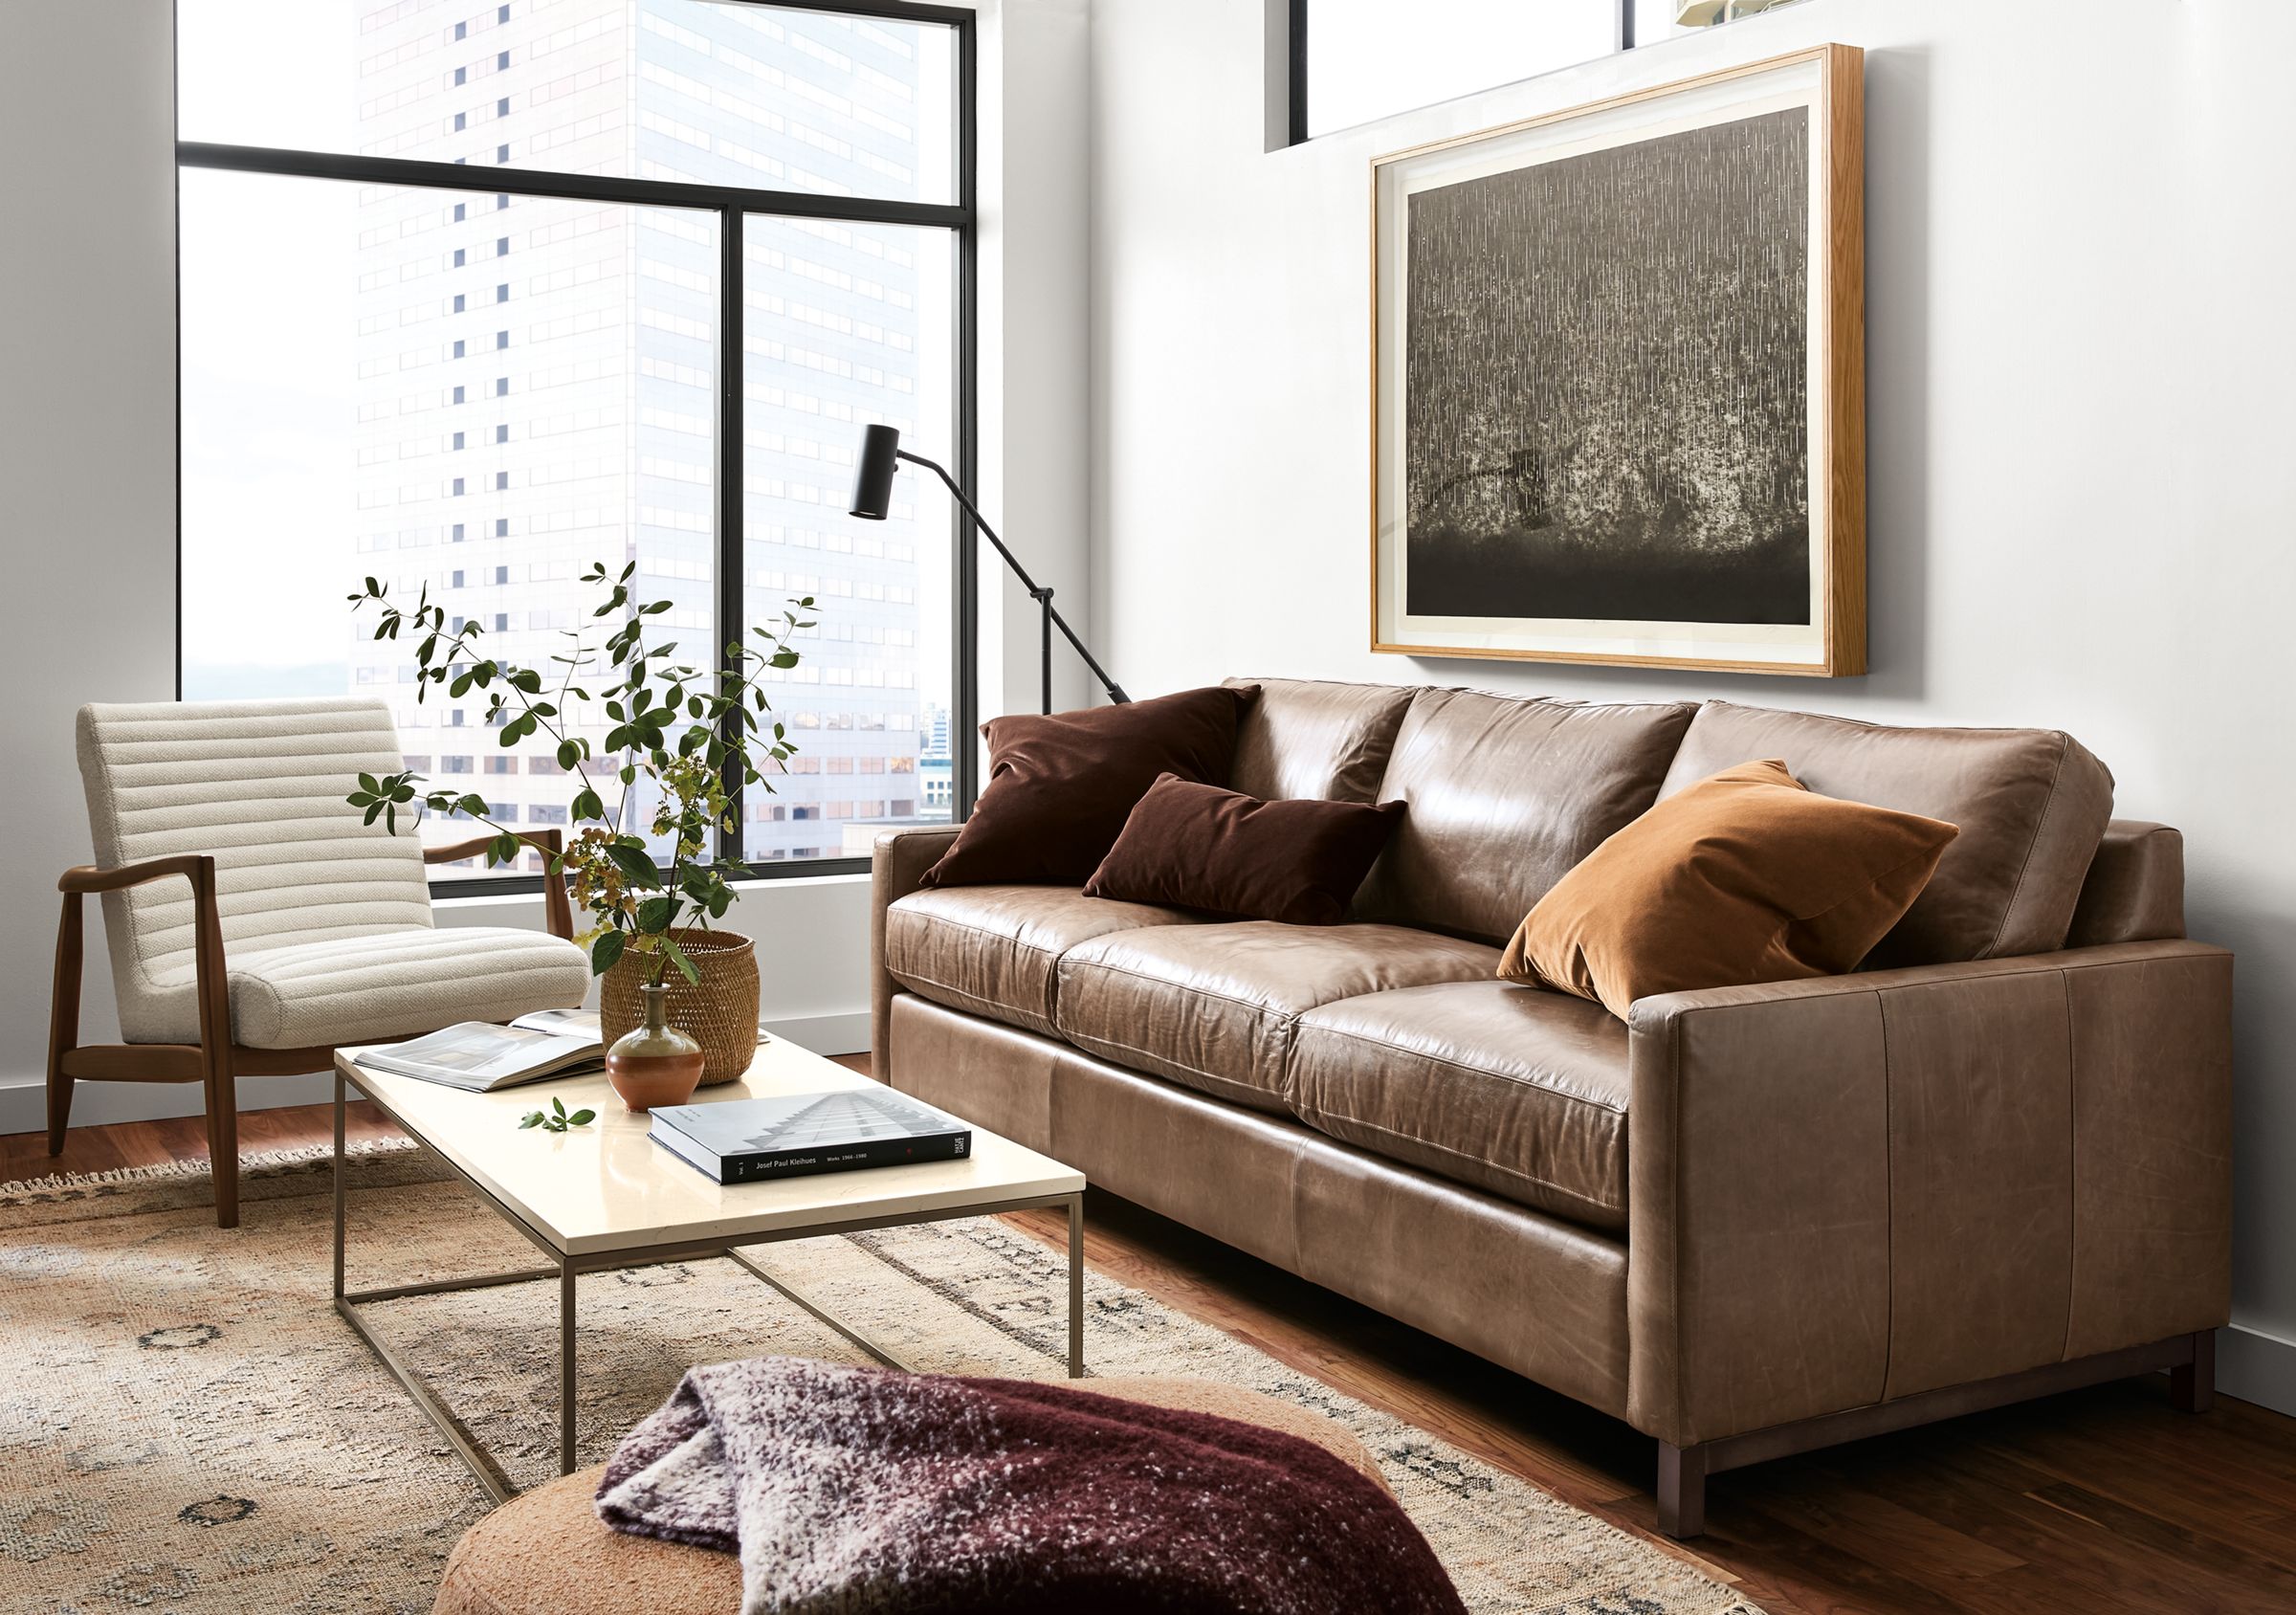 room with stevens sofa in vento leather, callan chair and asher ottoman.